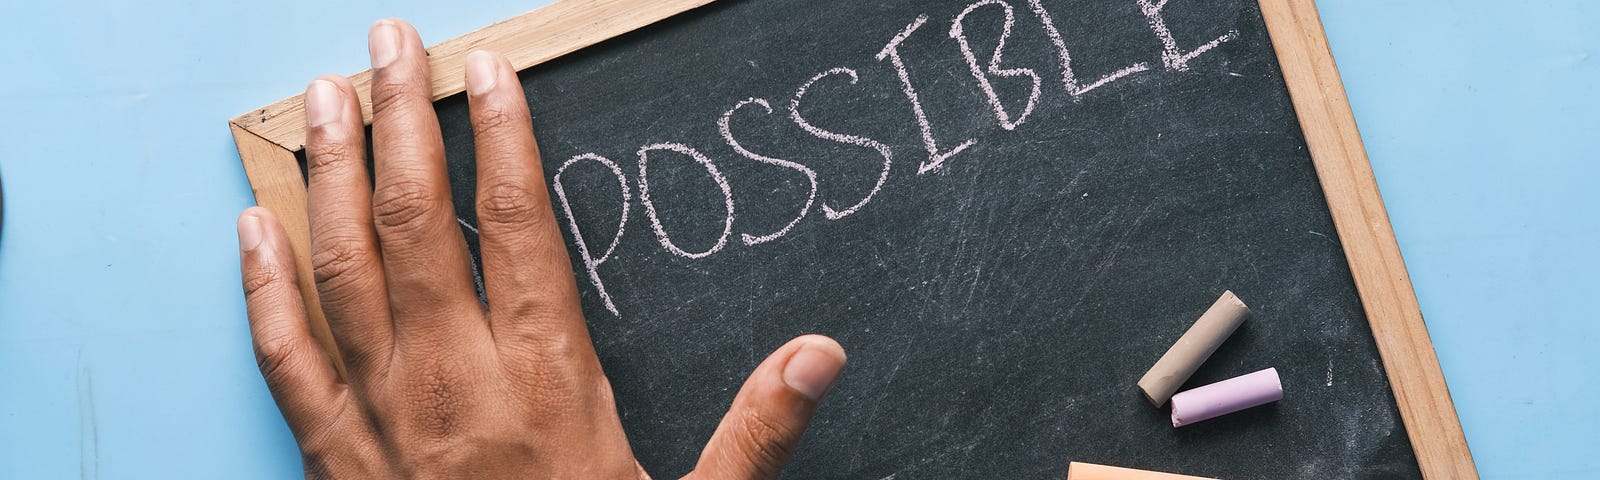 blackboard with “impossible” written on it, a hand covers the first two letters